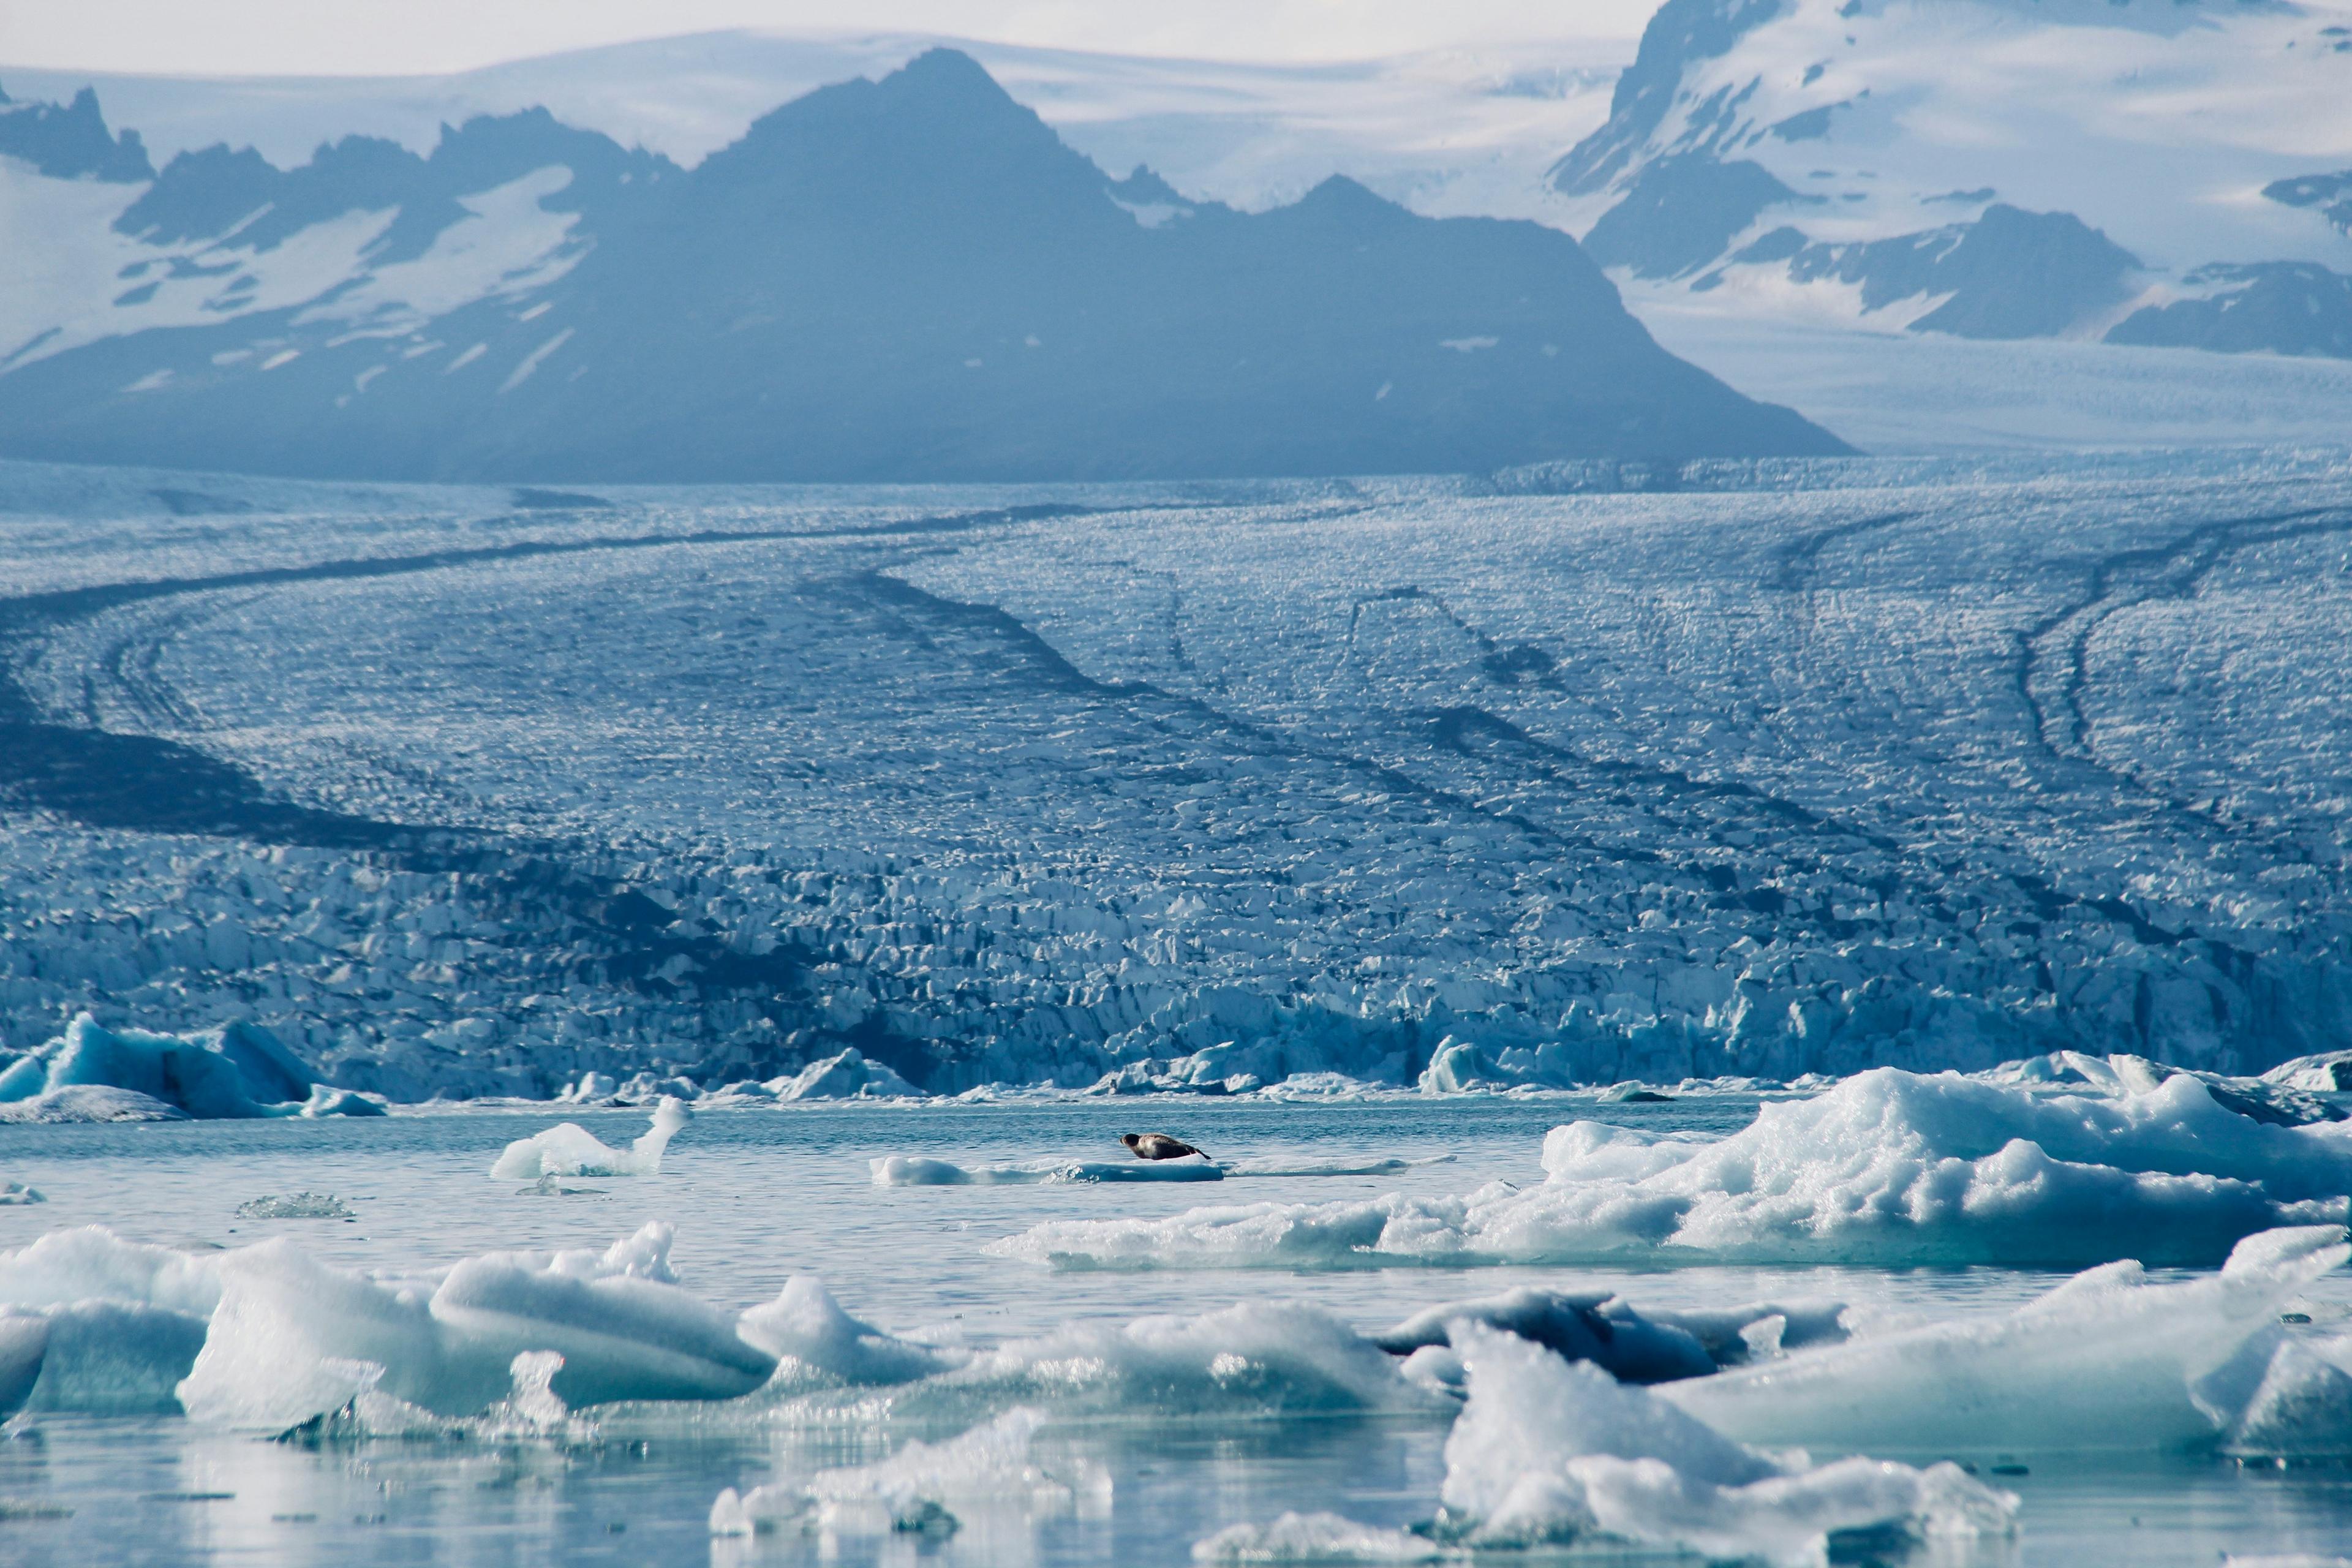 A glacial lagoon with floating icebergs, set against a backdrop of distant snowy mountains.